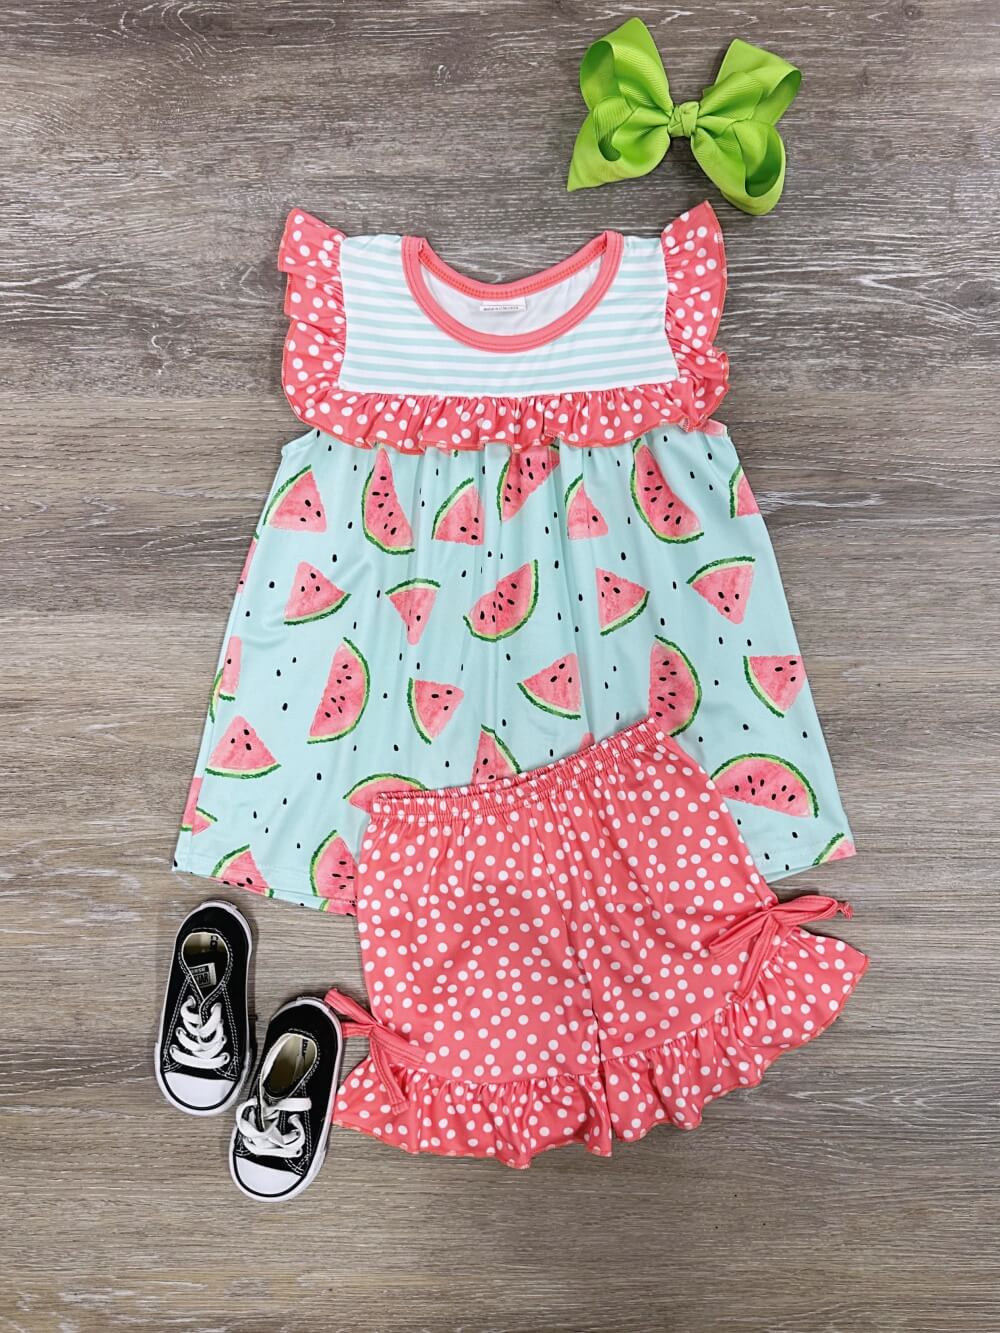 Slice of Summer Girls Watermelon Shorts Outfit